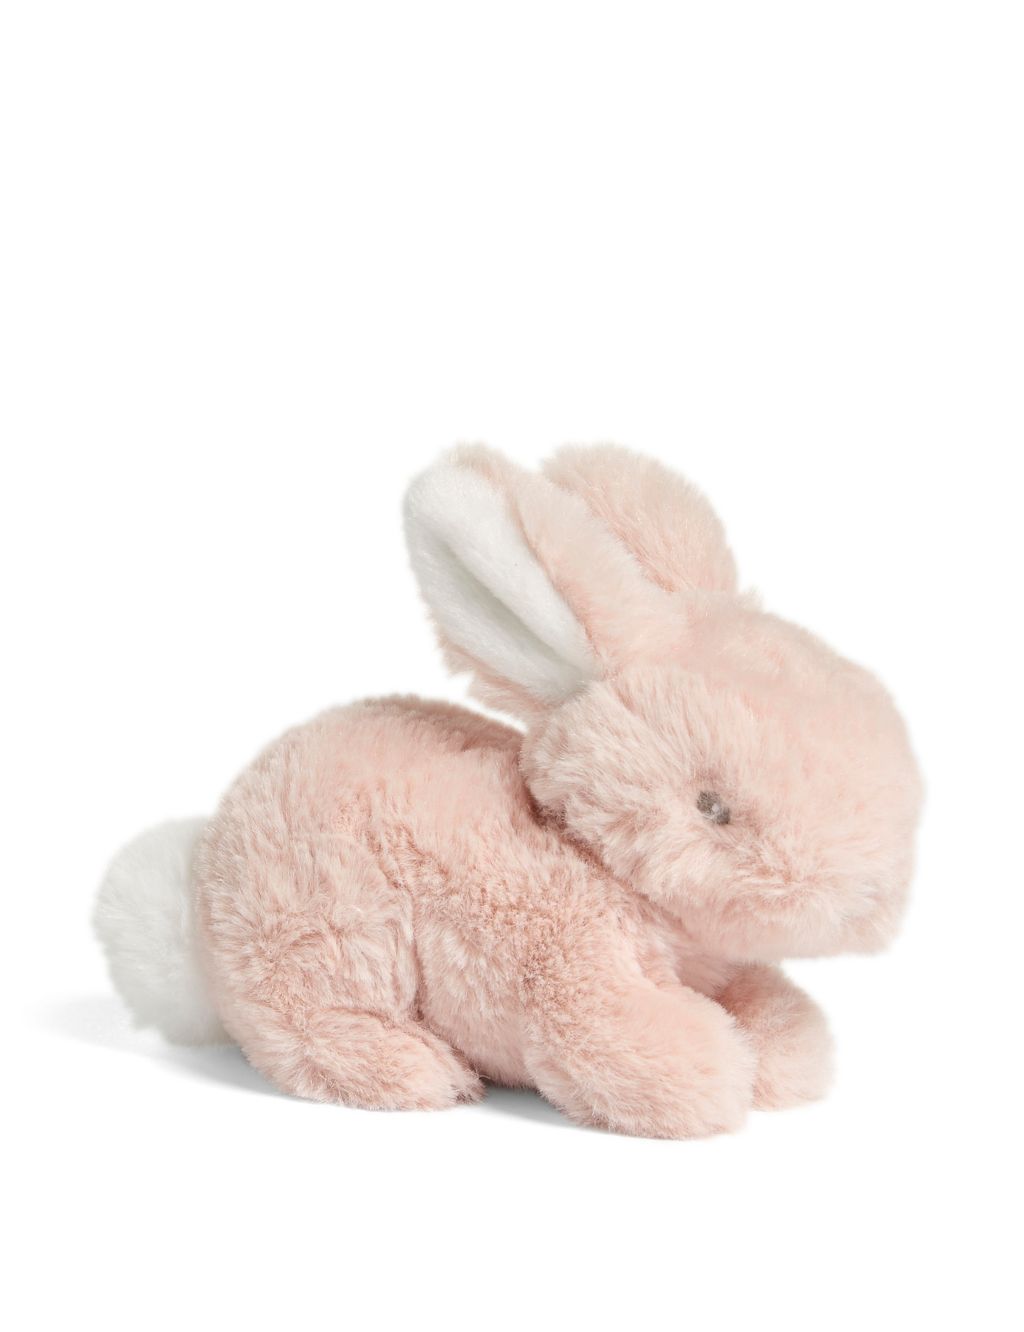 Forever Treasured Pink Bunny Soft Toy image 1